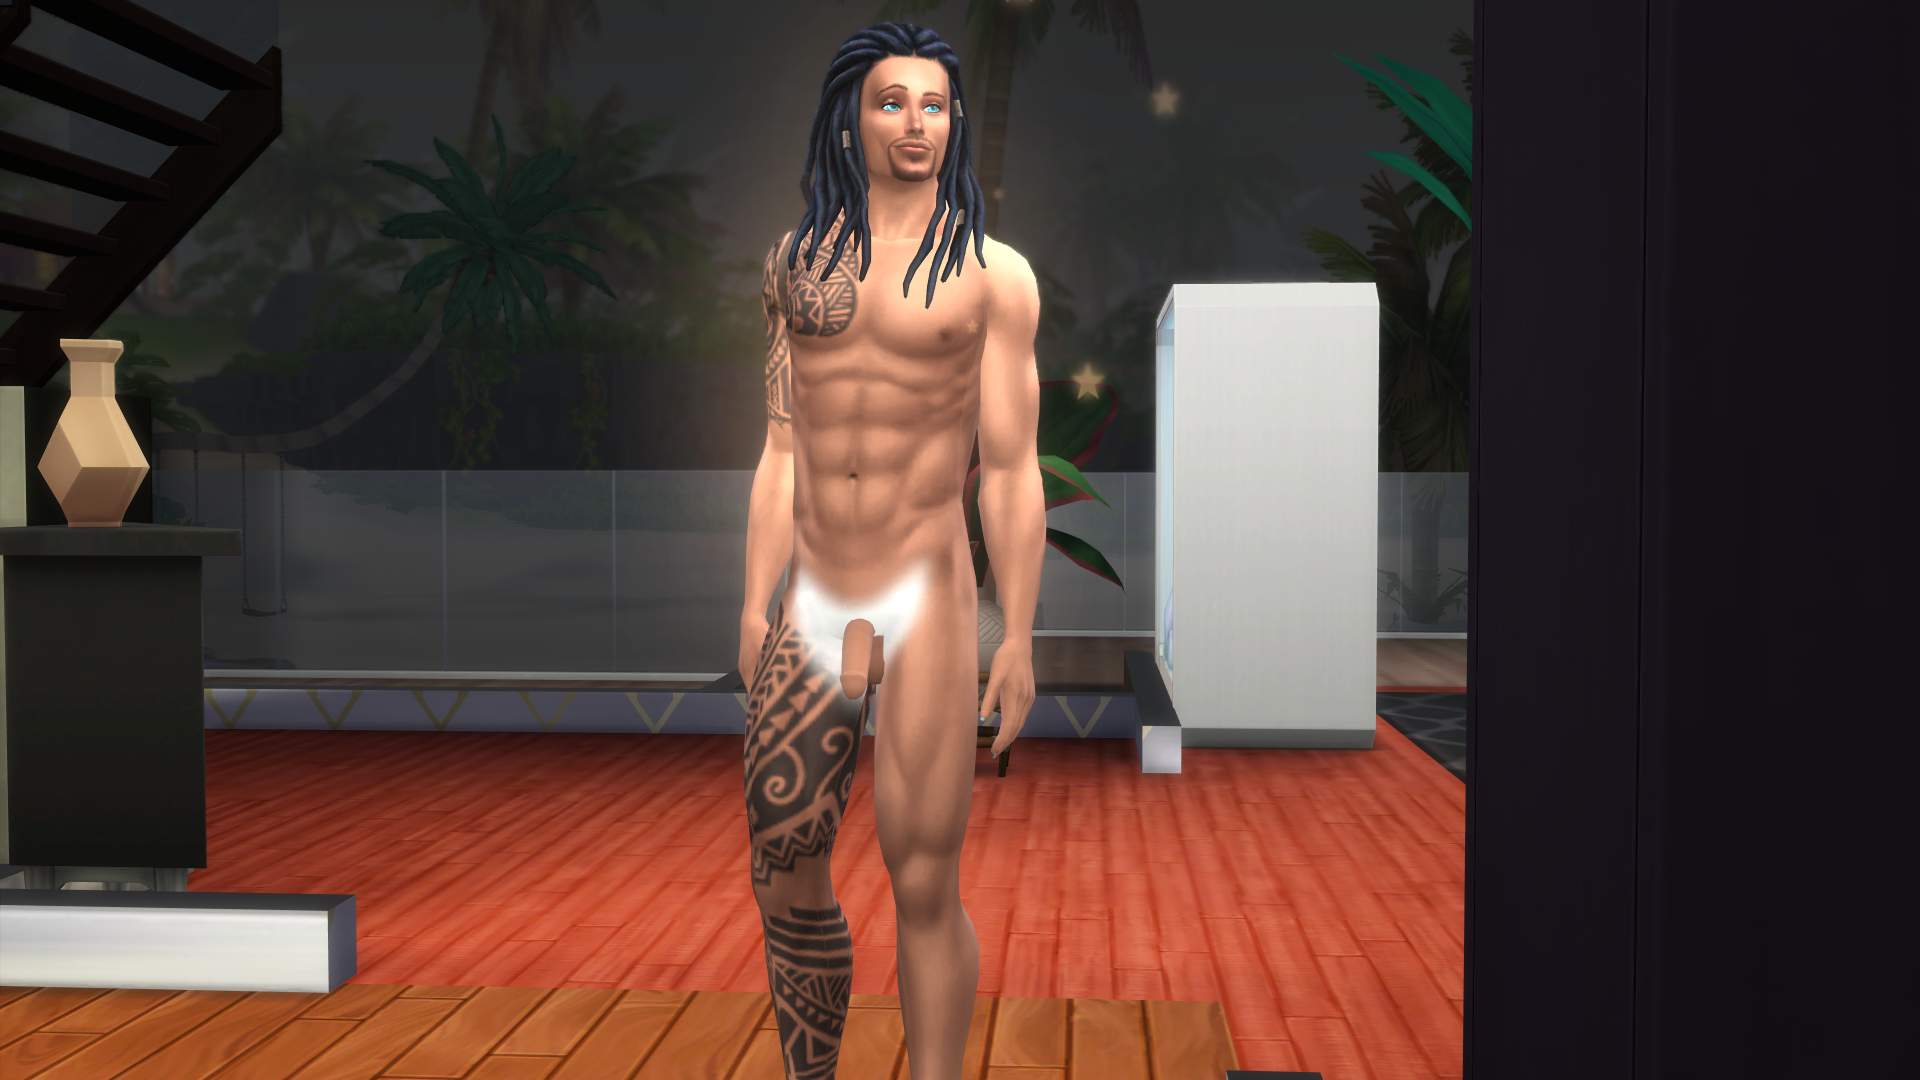 The sims nudes